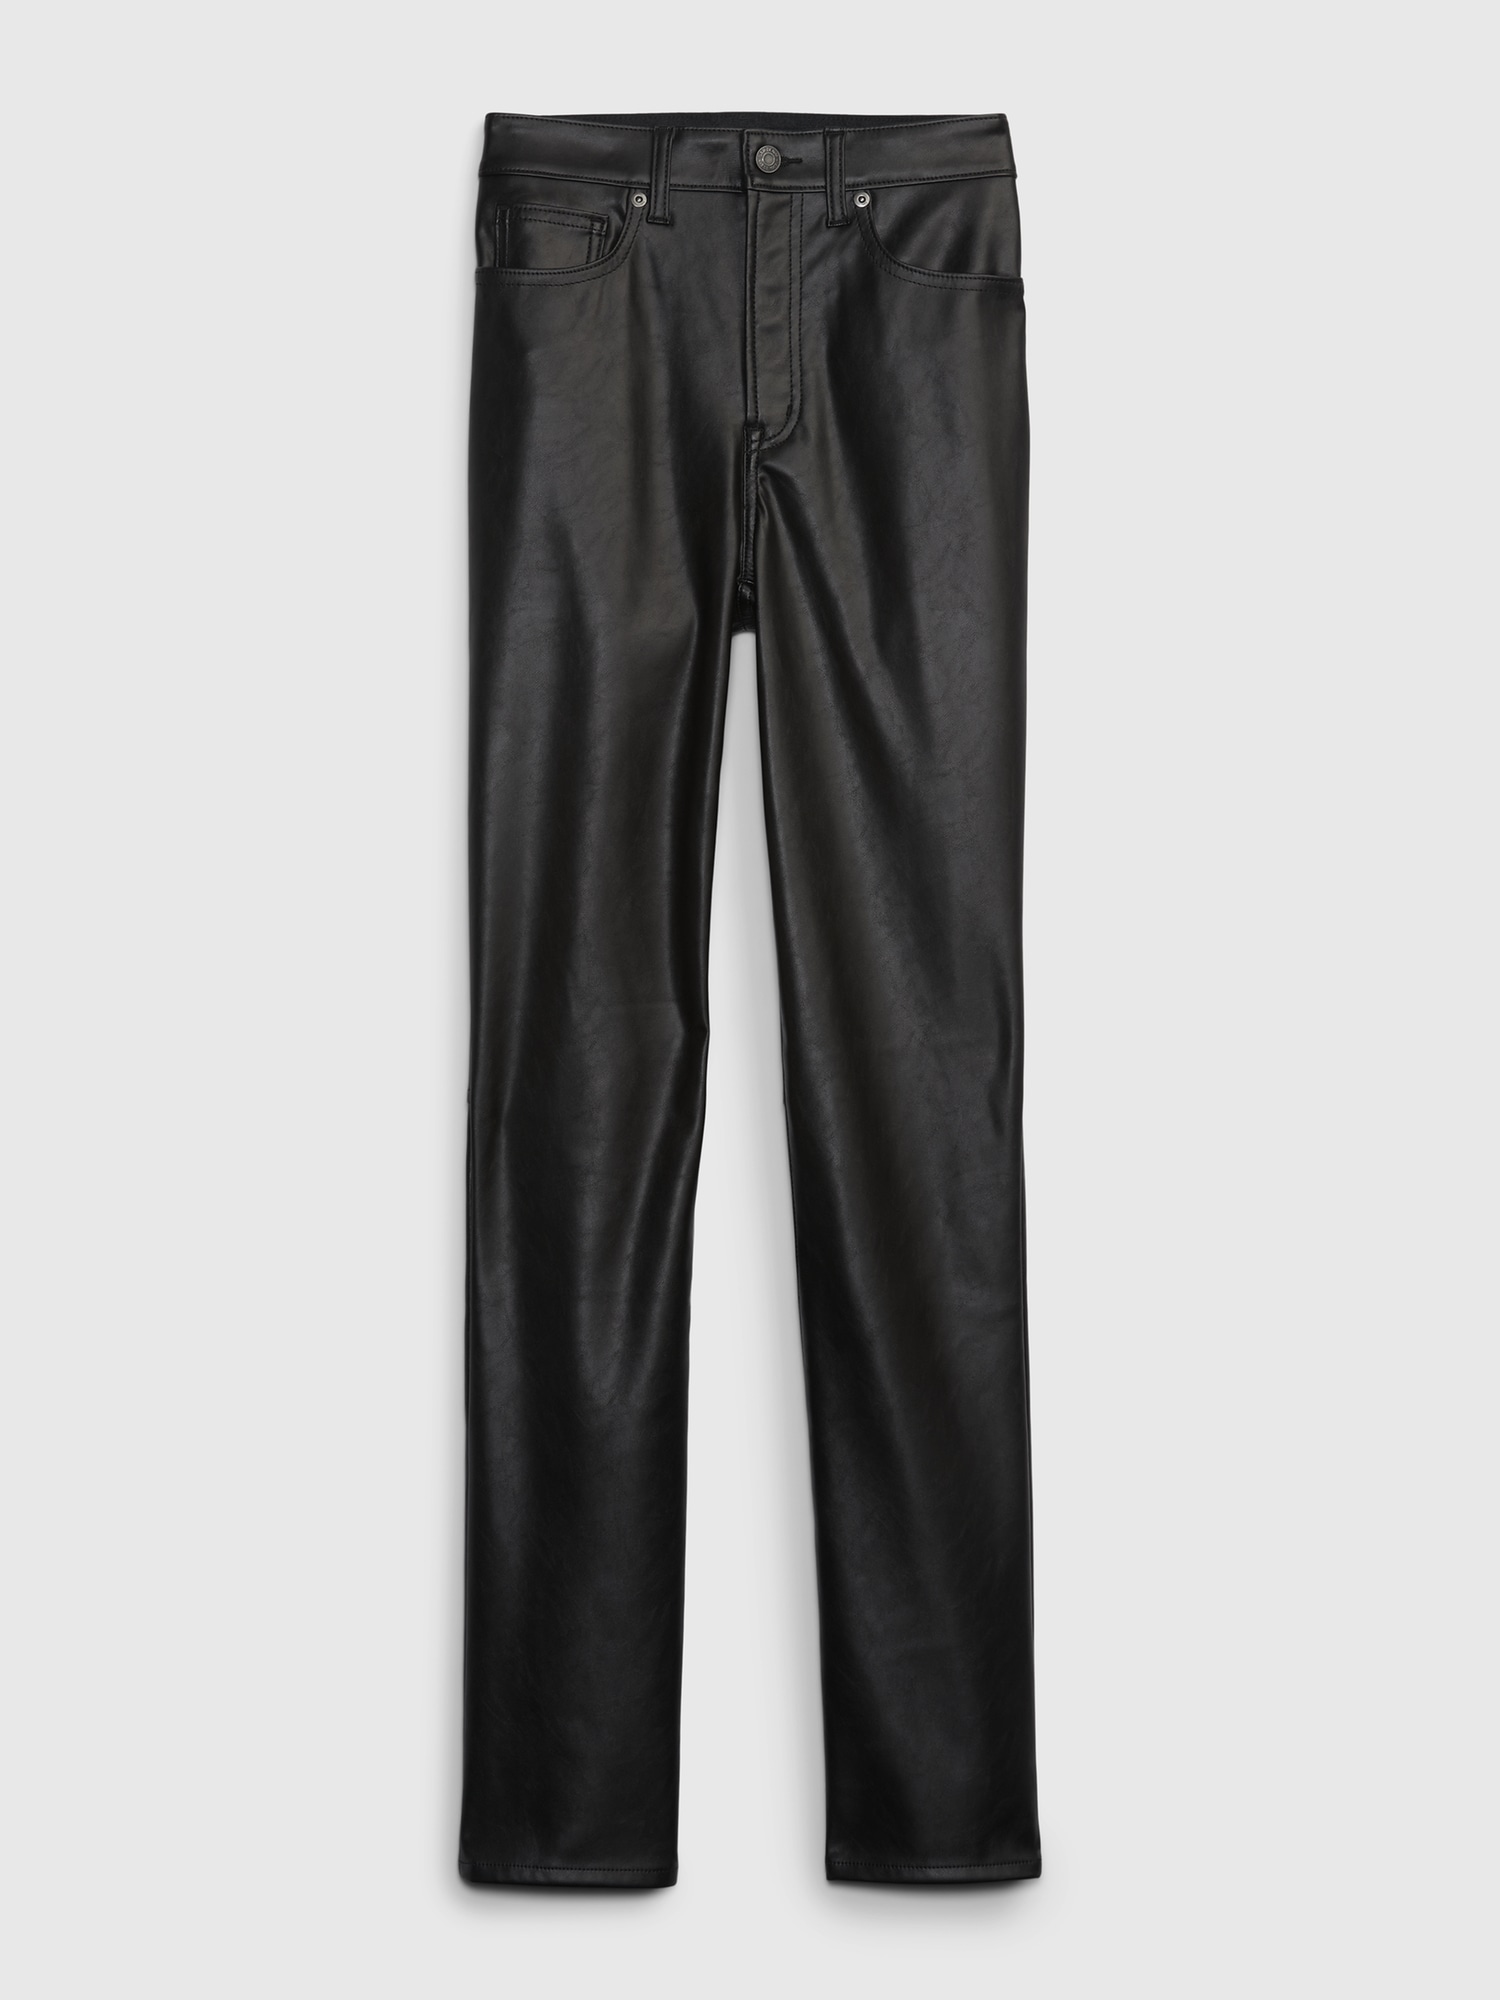 Express, Super High Waisted Faux Leather Moto Skinny Pant in Pitch Black